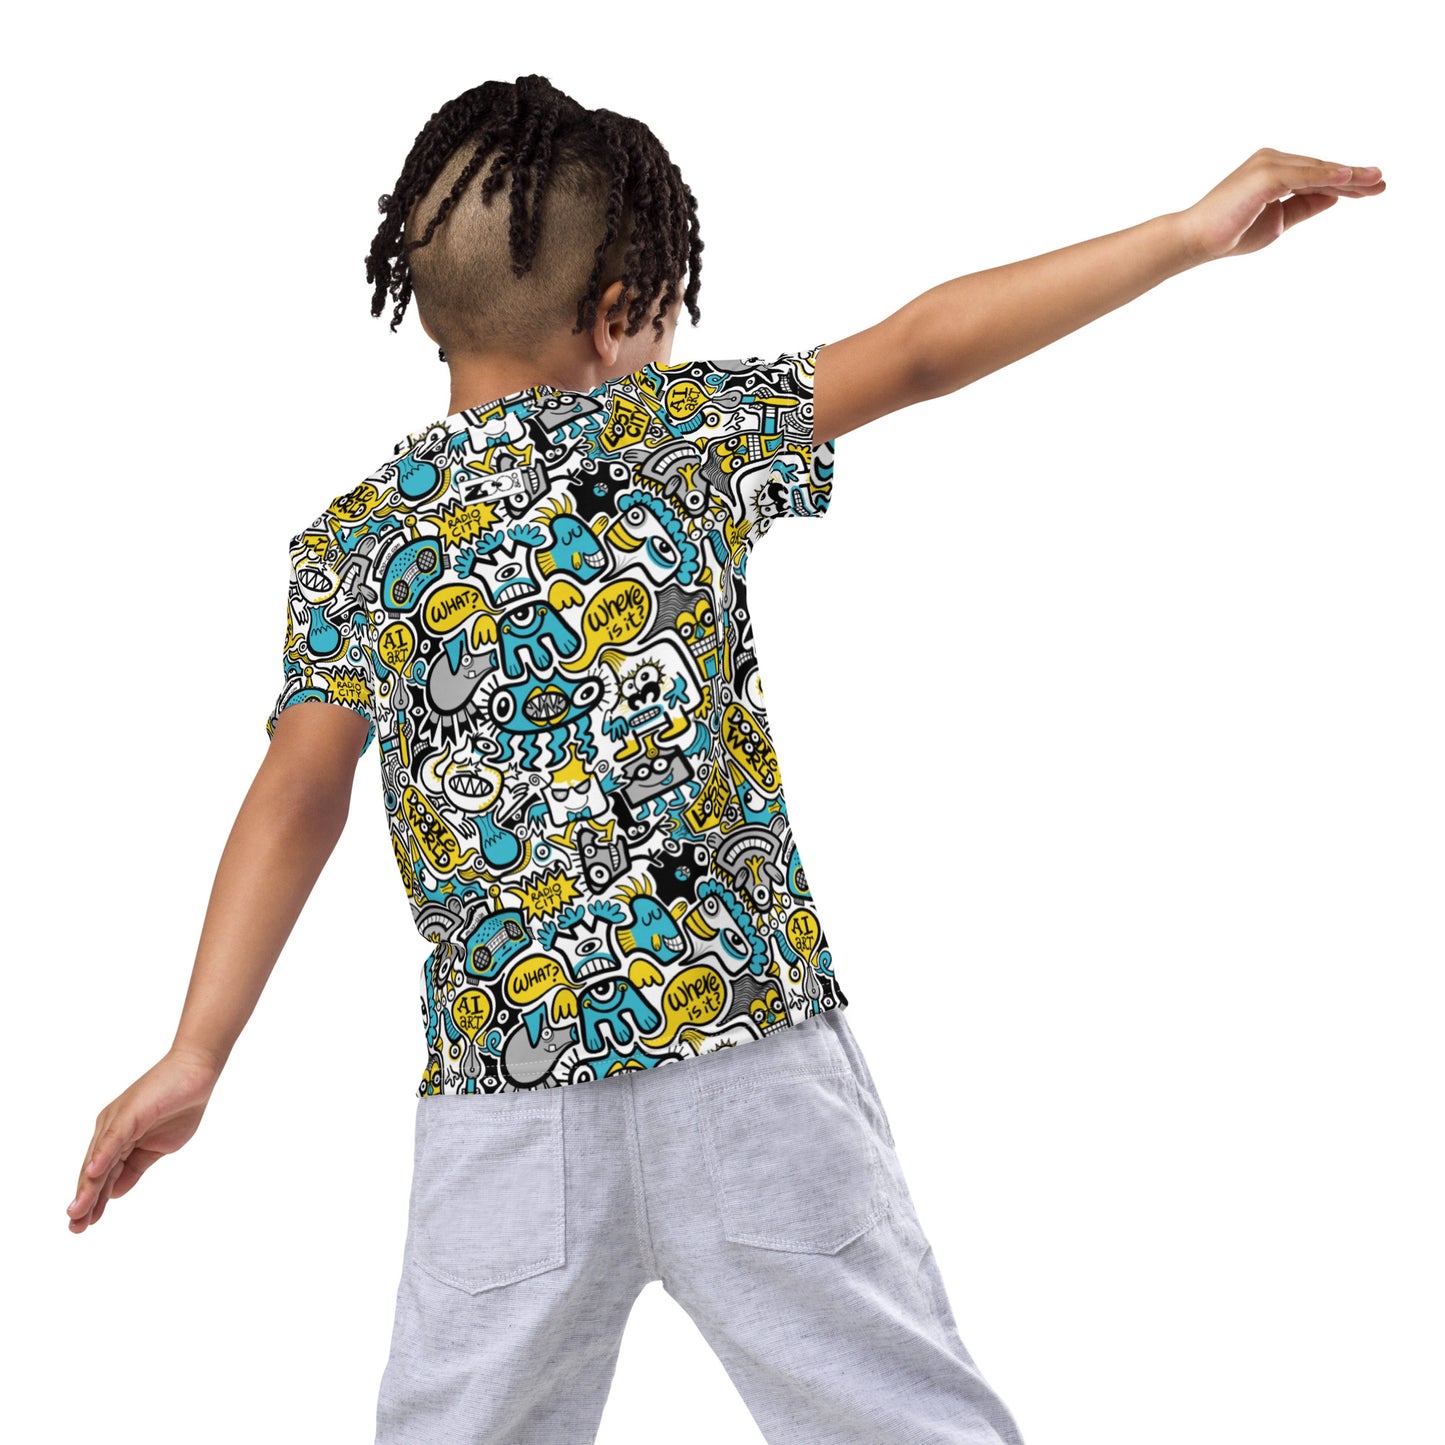 Discover a whole Doodle world in Lost city Kids crew neck t-shirt. Back view